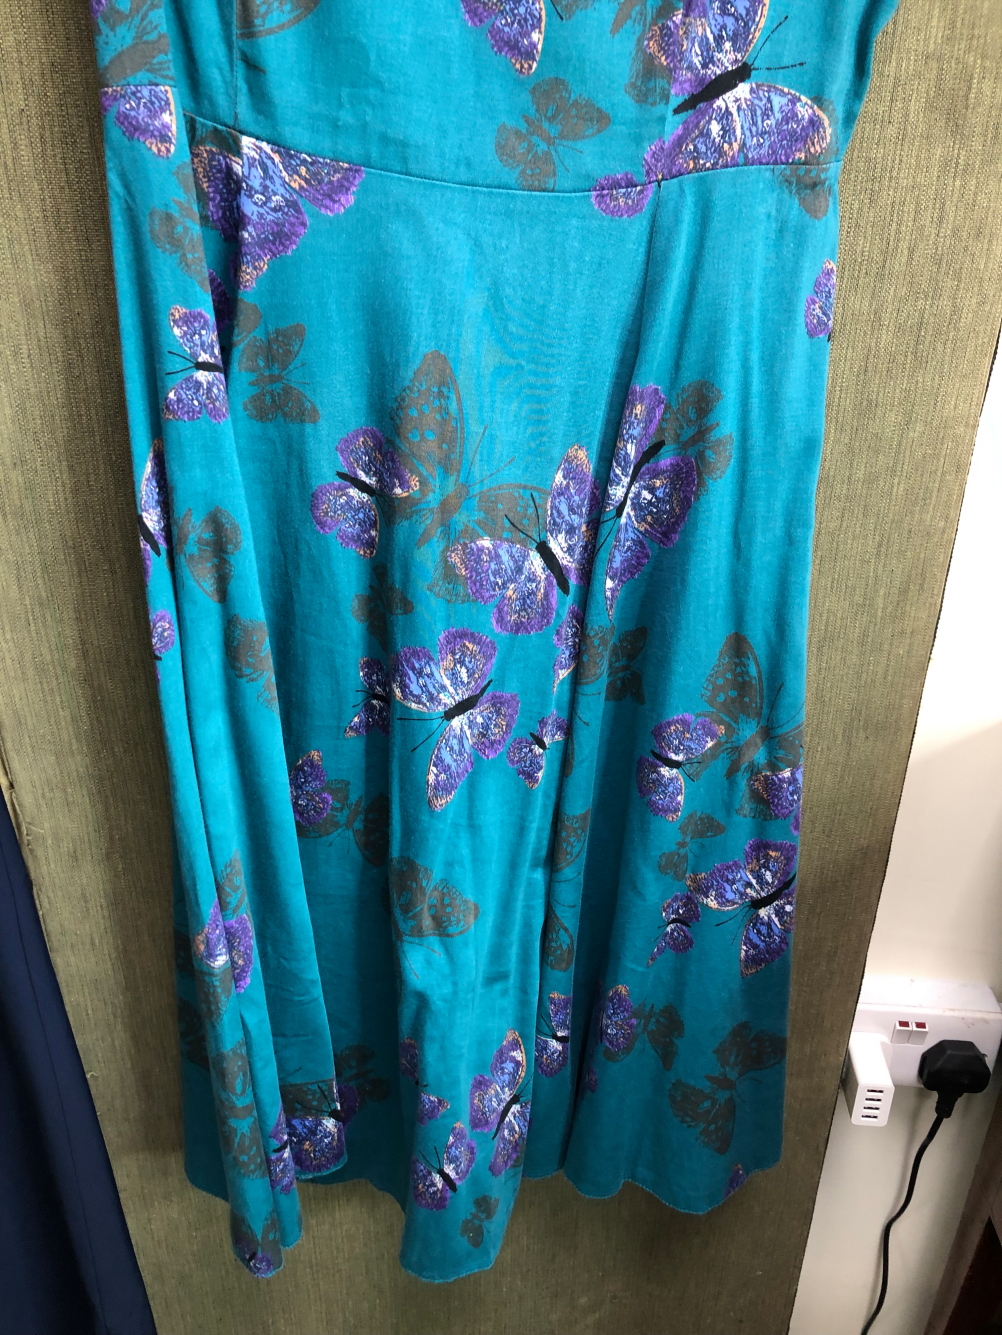 A LADY VINTAGE LONDON GREEN DRESS WITH PURPLE BUTTERFLIES SIZE 14 TOGETHER WITH LIQUORISH NAVY - Image 5 of 14